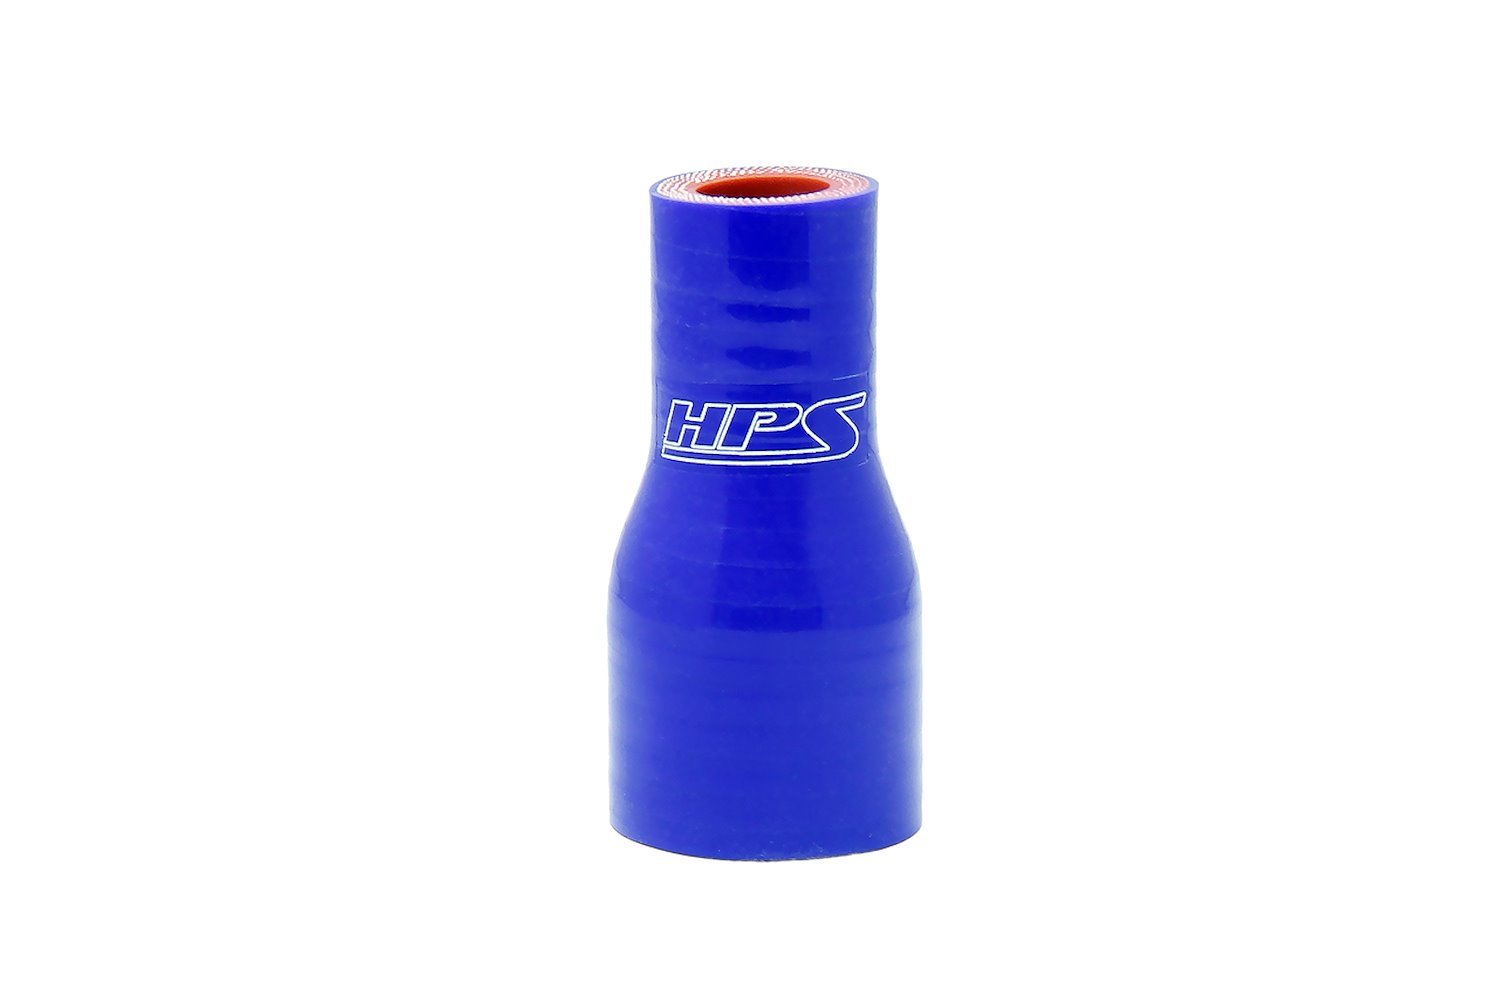 HTSR-100-187-BLUE Silicone Reducer Hose, High-Temp 4-Ply Reinforced, 1 in. - 1-7/8 in. ID, 3 in. Long, Blue